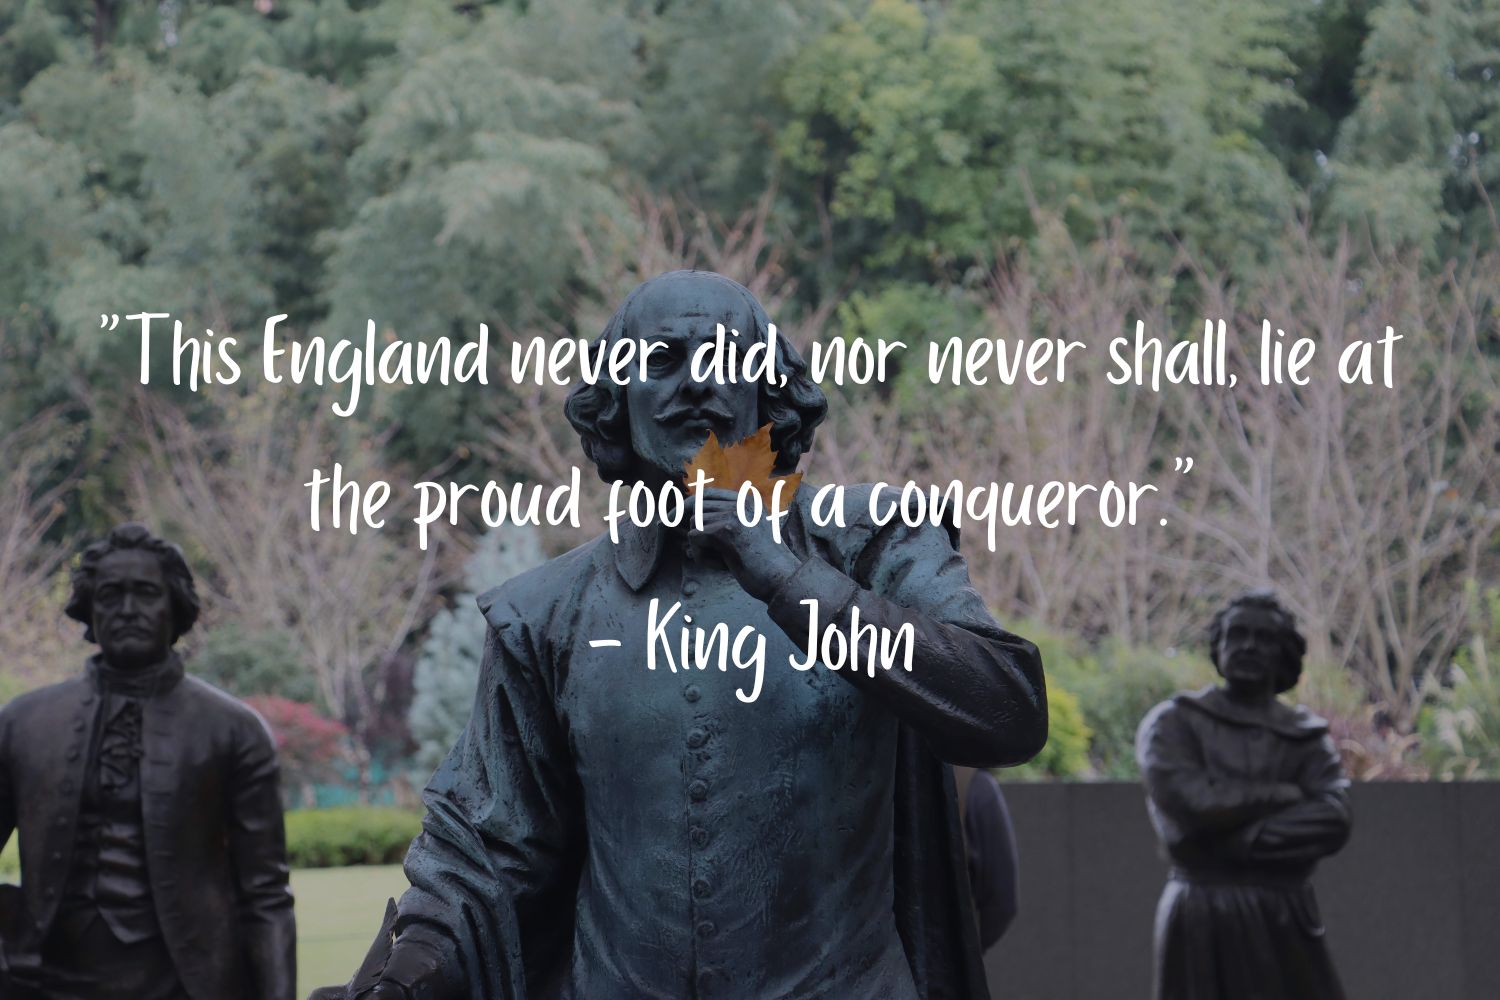 a photo of a statue of william shakespeare with a famous shakespearean quote at the forefront